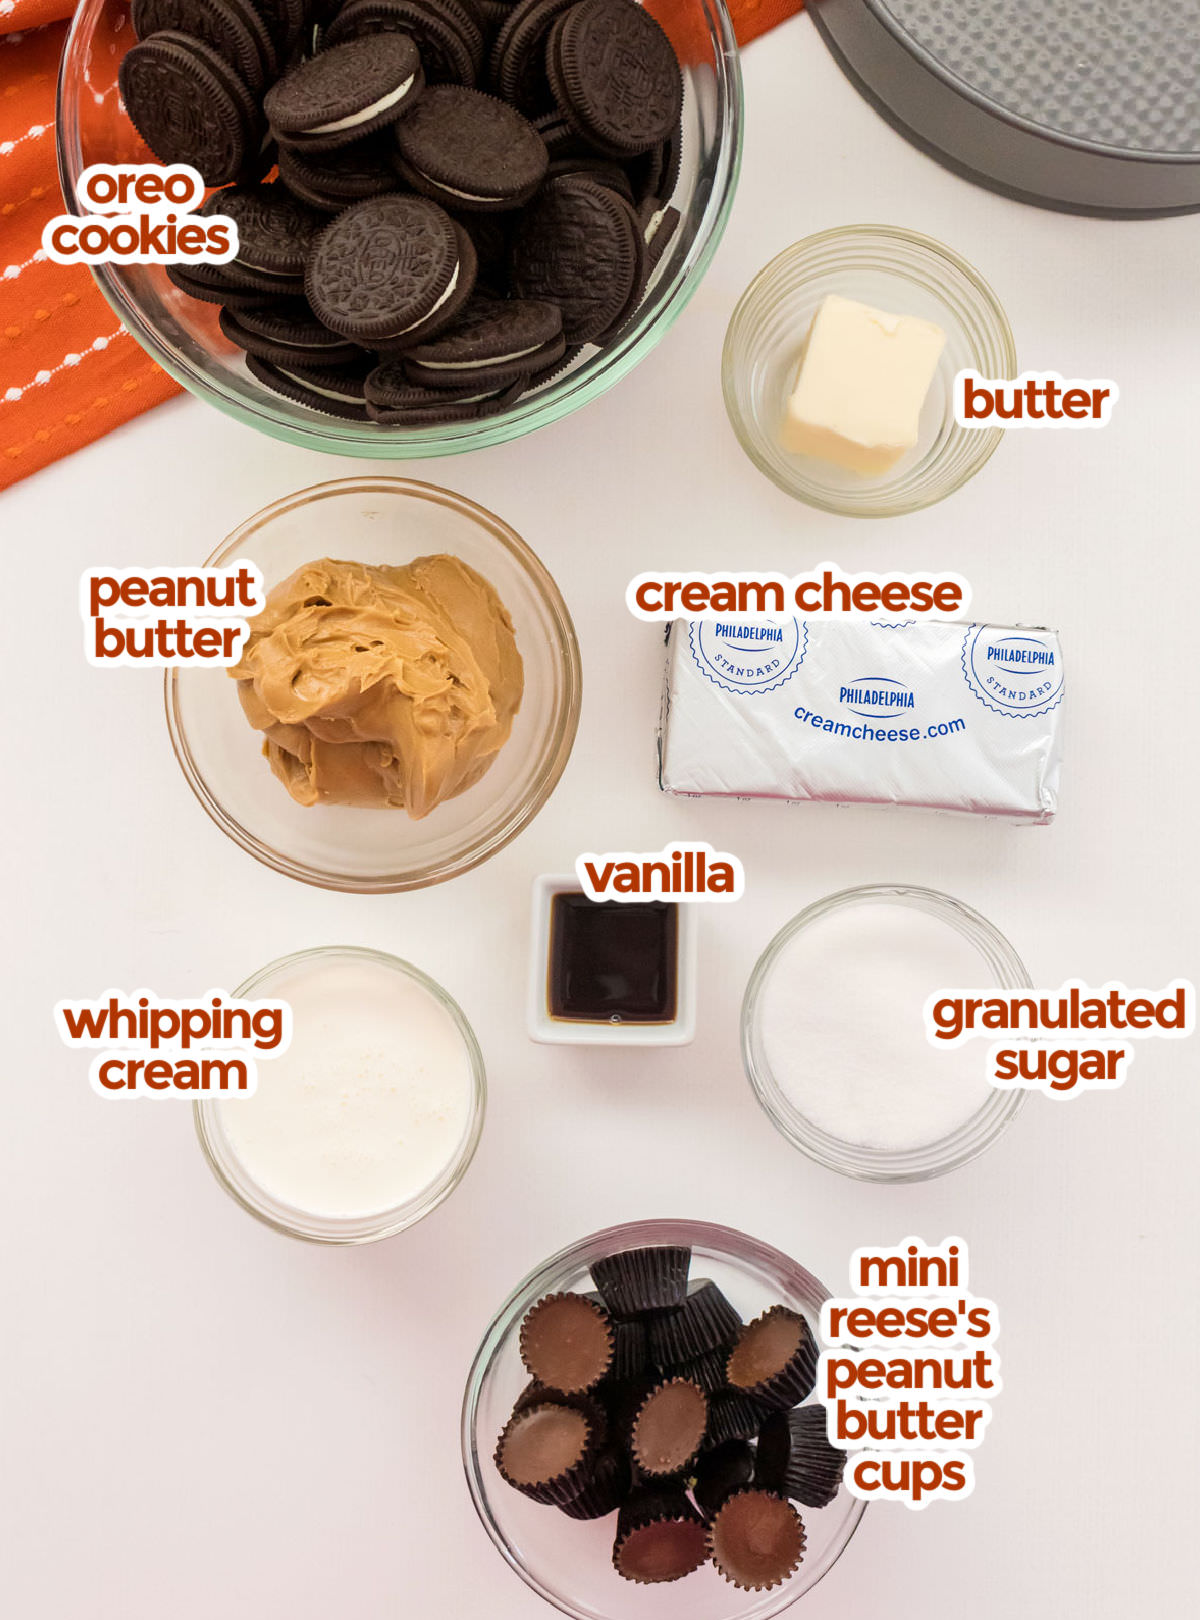 All the ingredients you need to make No Bake Peanut Butter Cheesecake including Oreos, butter, peanut Butter, cream cheese, granulated sugar, vanilla, whipping cream and mini Reese's Peanut Butter Cups.